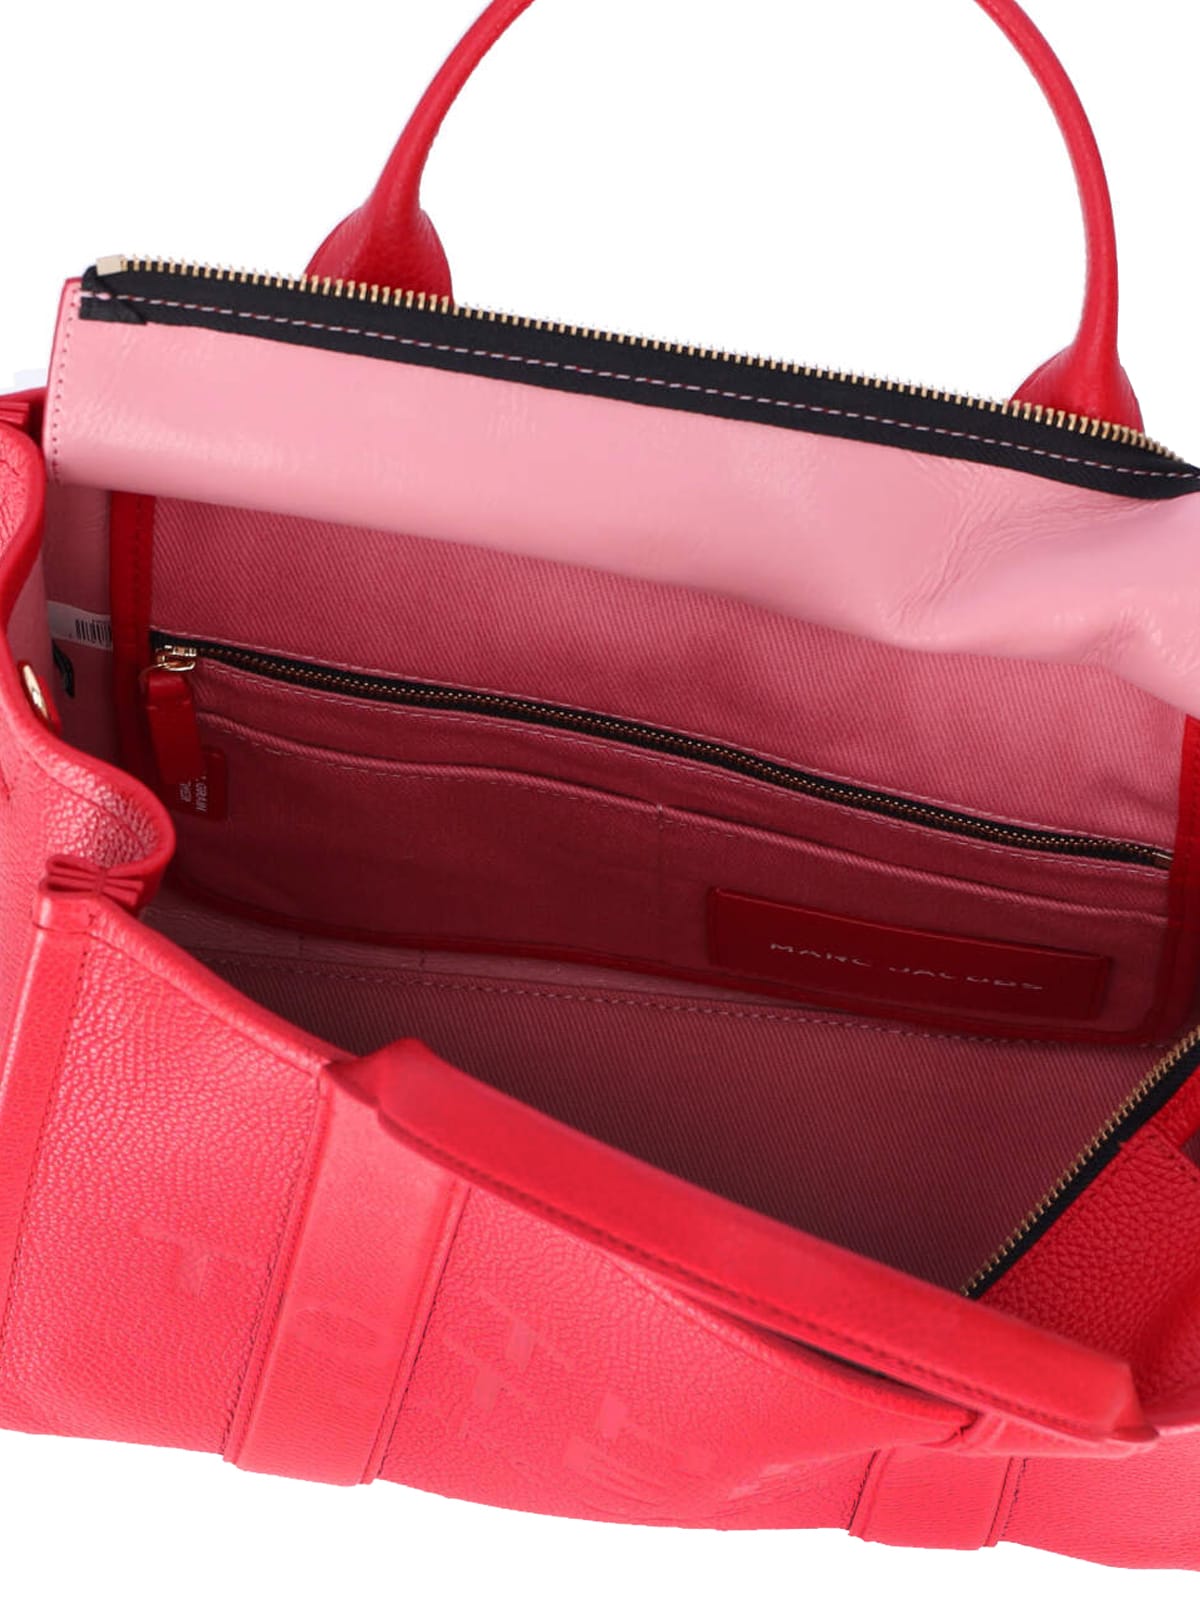 Shop Marc Jacobs The Medium Tote Bag In Red